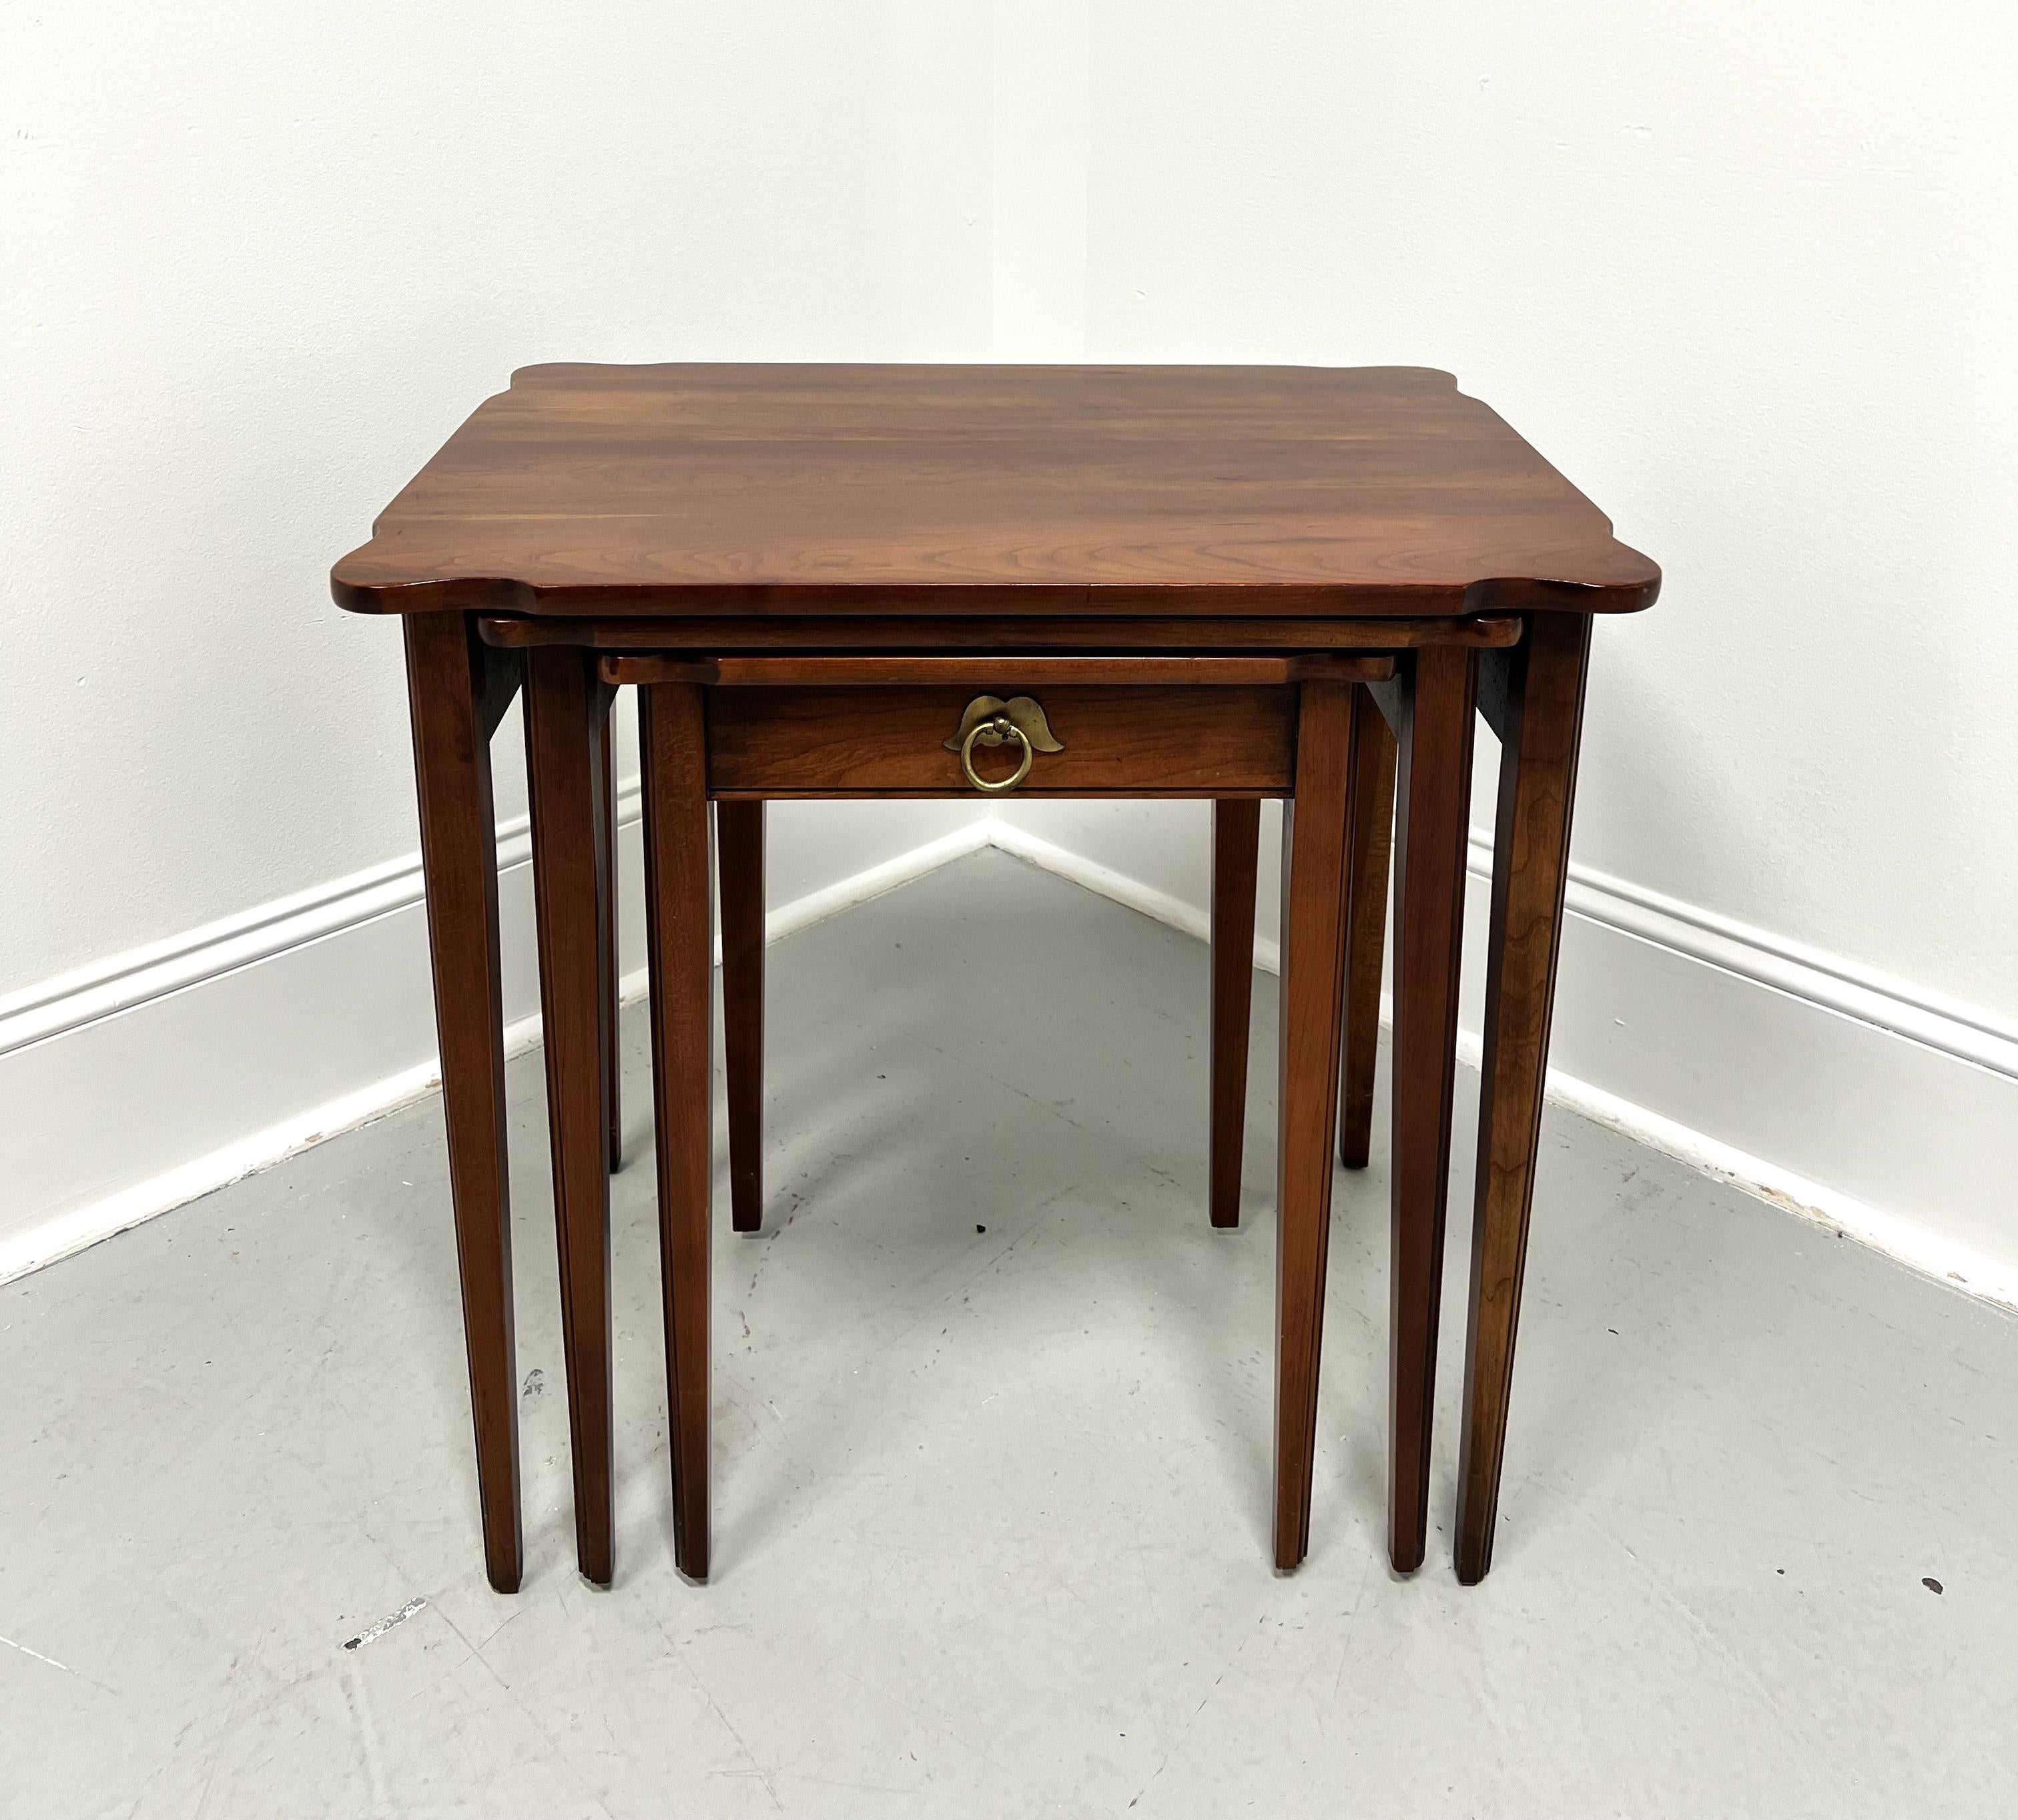 20th Century STATTON Centennial Cherry Chippendale Nesting Tables - Set of 3 For Sale